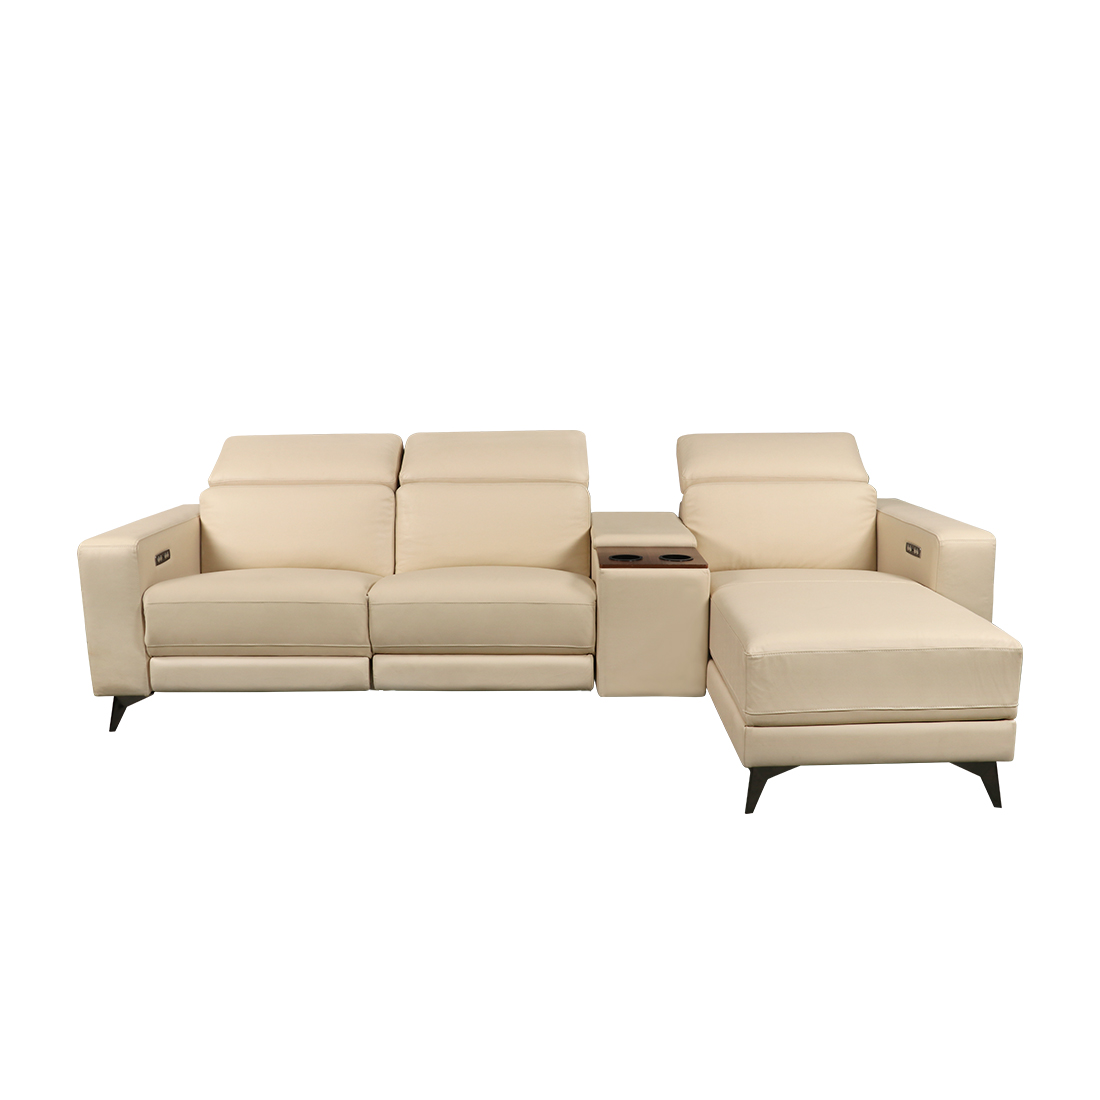 Ancona - Luxury Recliner with Lounger